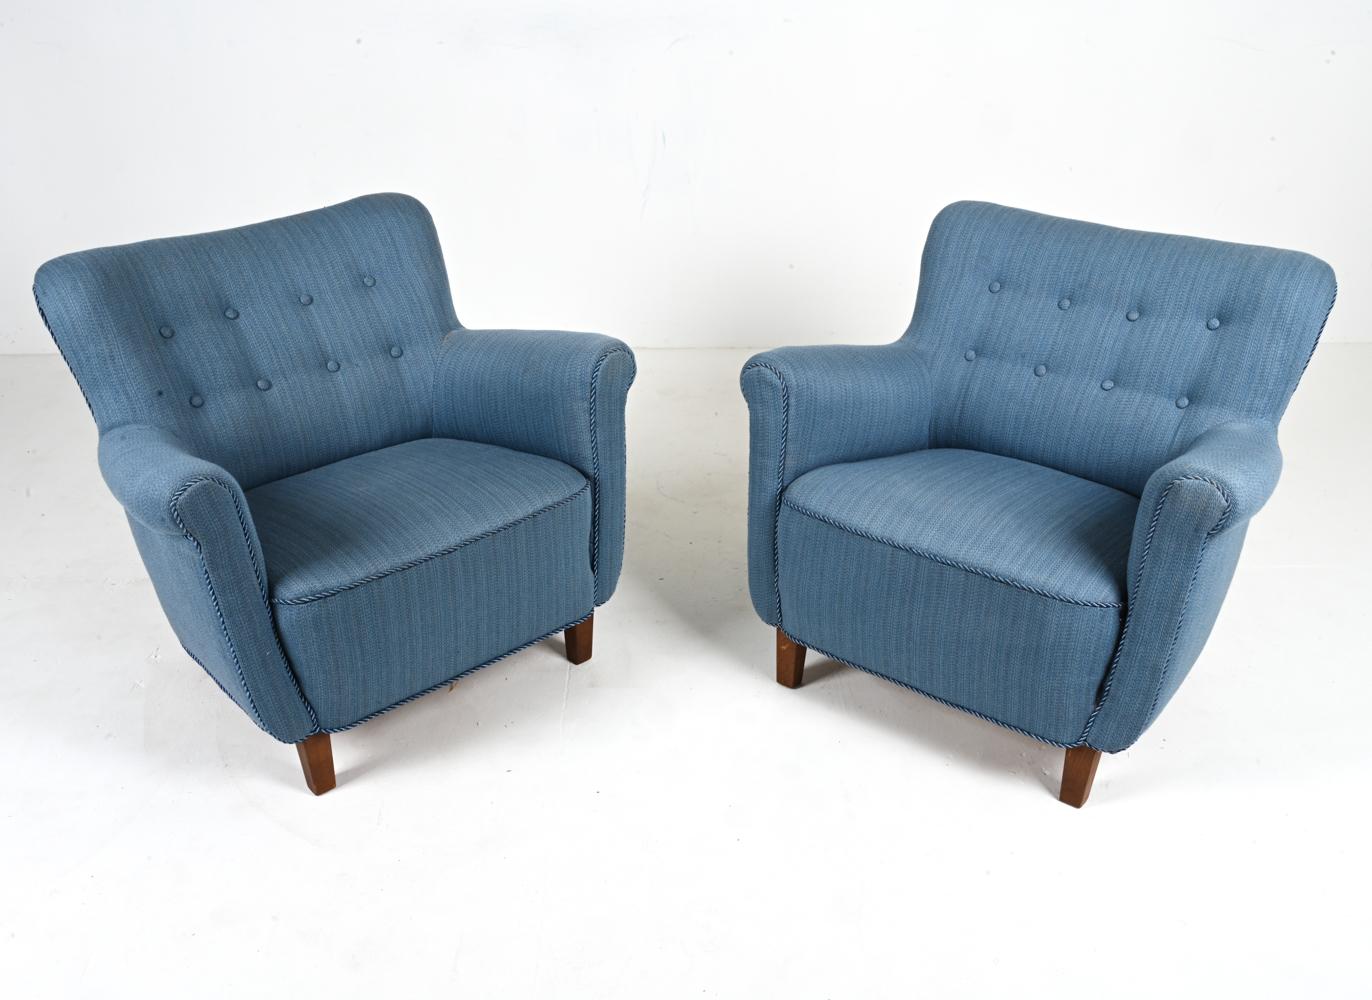 Channel the Danish art of coziness with this classic pair of easy chairs by a master Scandinavian furnituremaker. These chairs feature a classic silhouette which resembles that of the Model 1518 chair by Fritz Hansen or the 